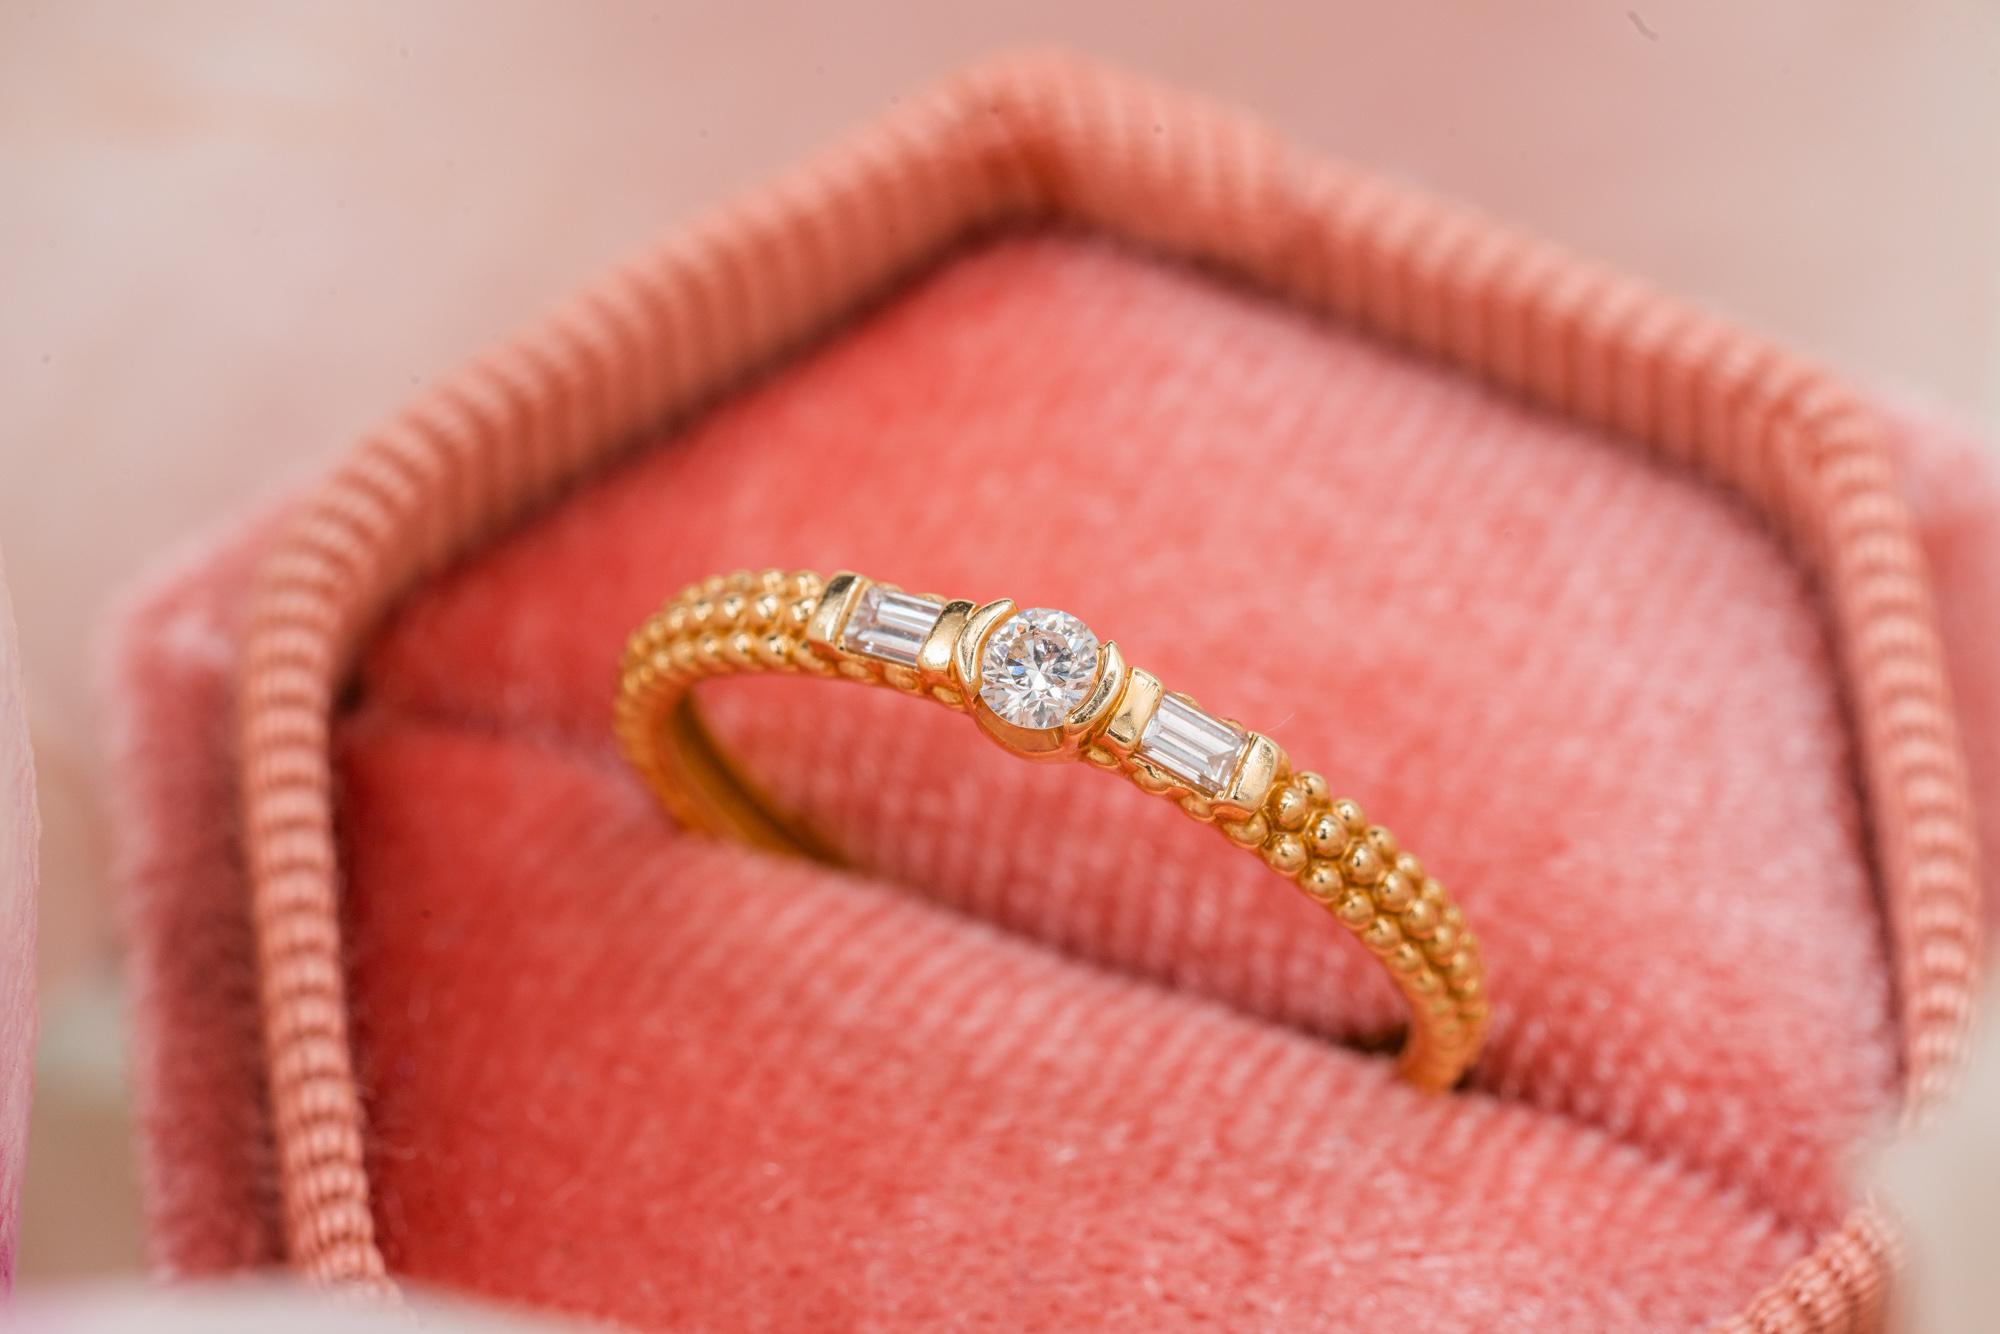 Such a classy and elegant three stone designer ring with sparkly diamonds and a bullet-work shank. This beautiful ring is made of solid 18kt gold and is produced by a famous French brand Maboussin.

The central stone is a delicate extremely clear